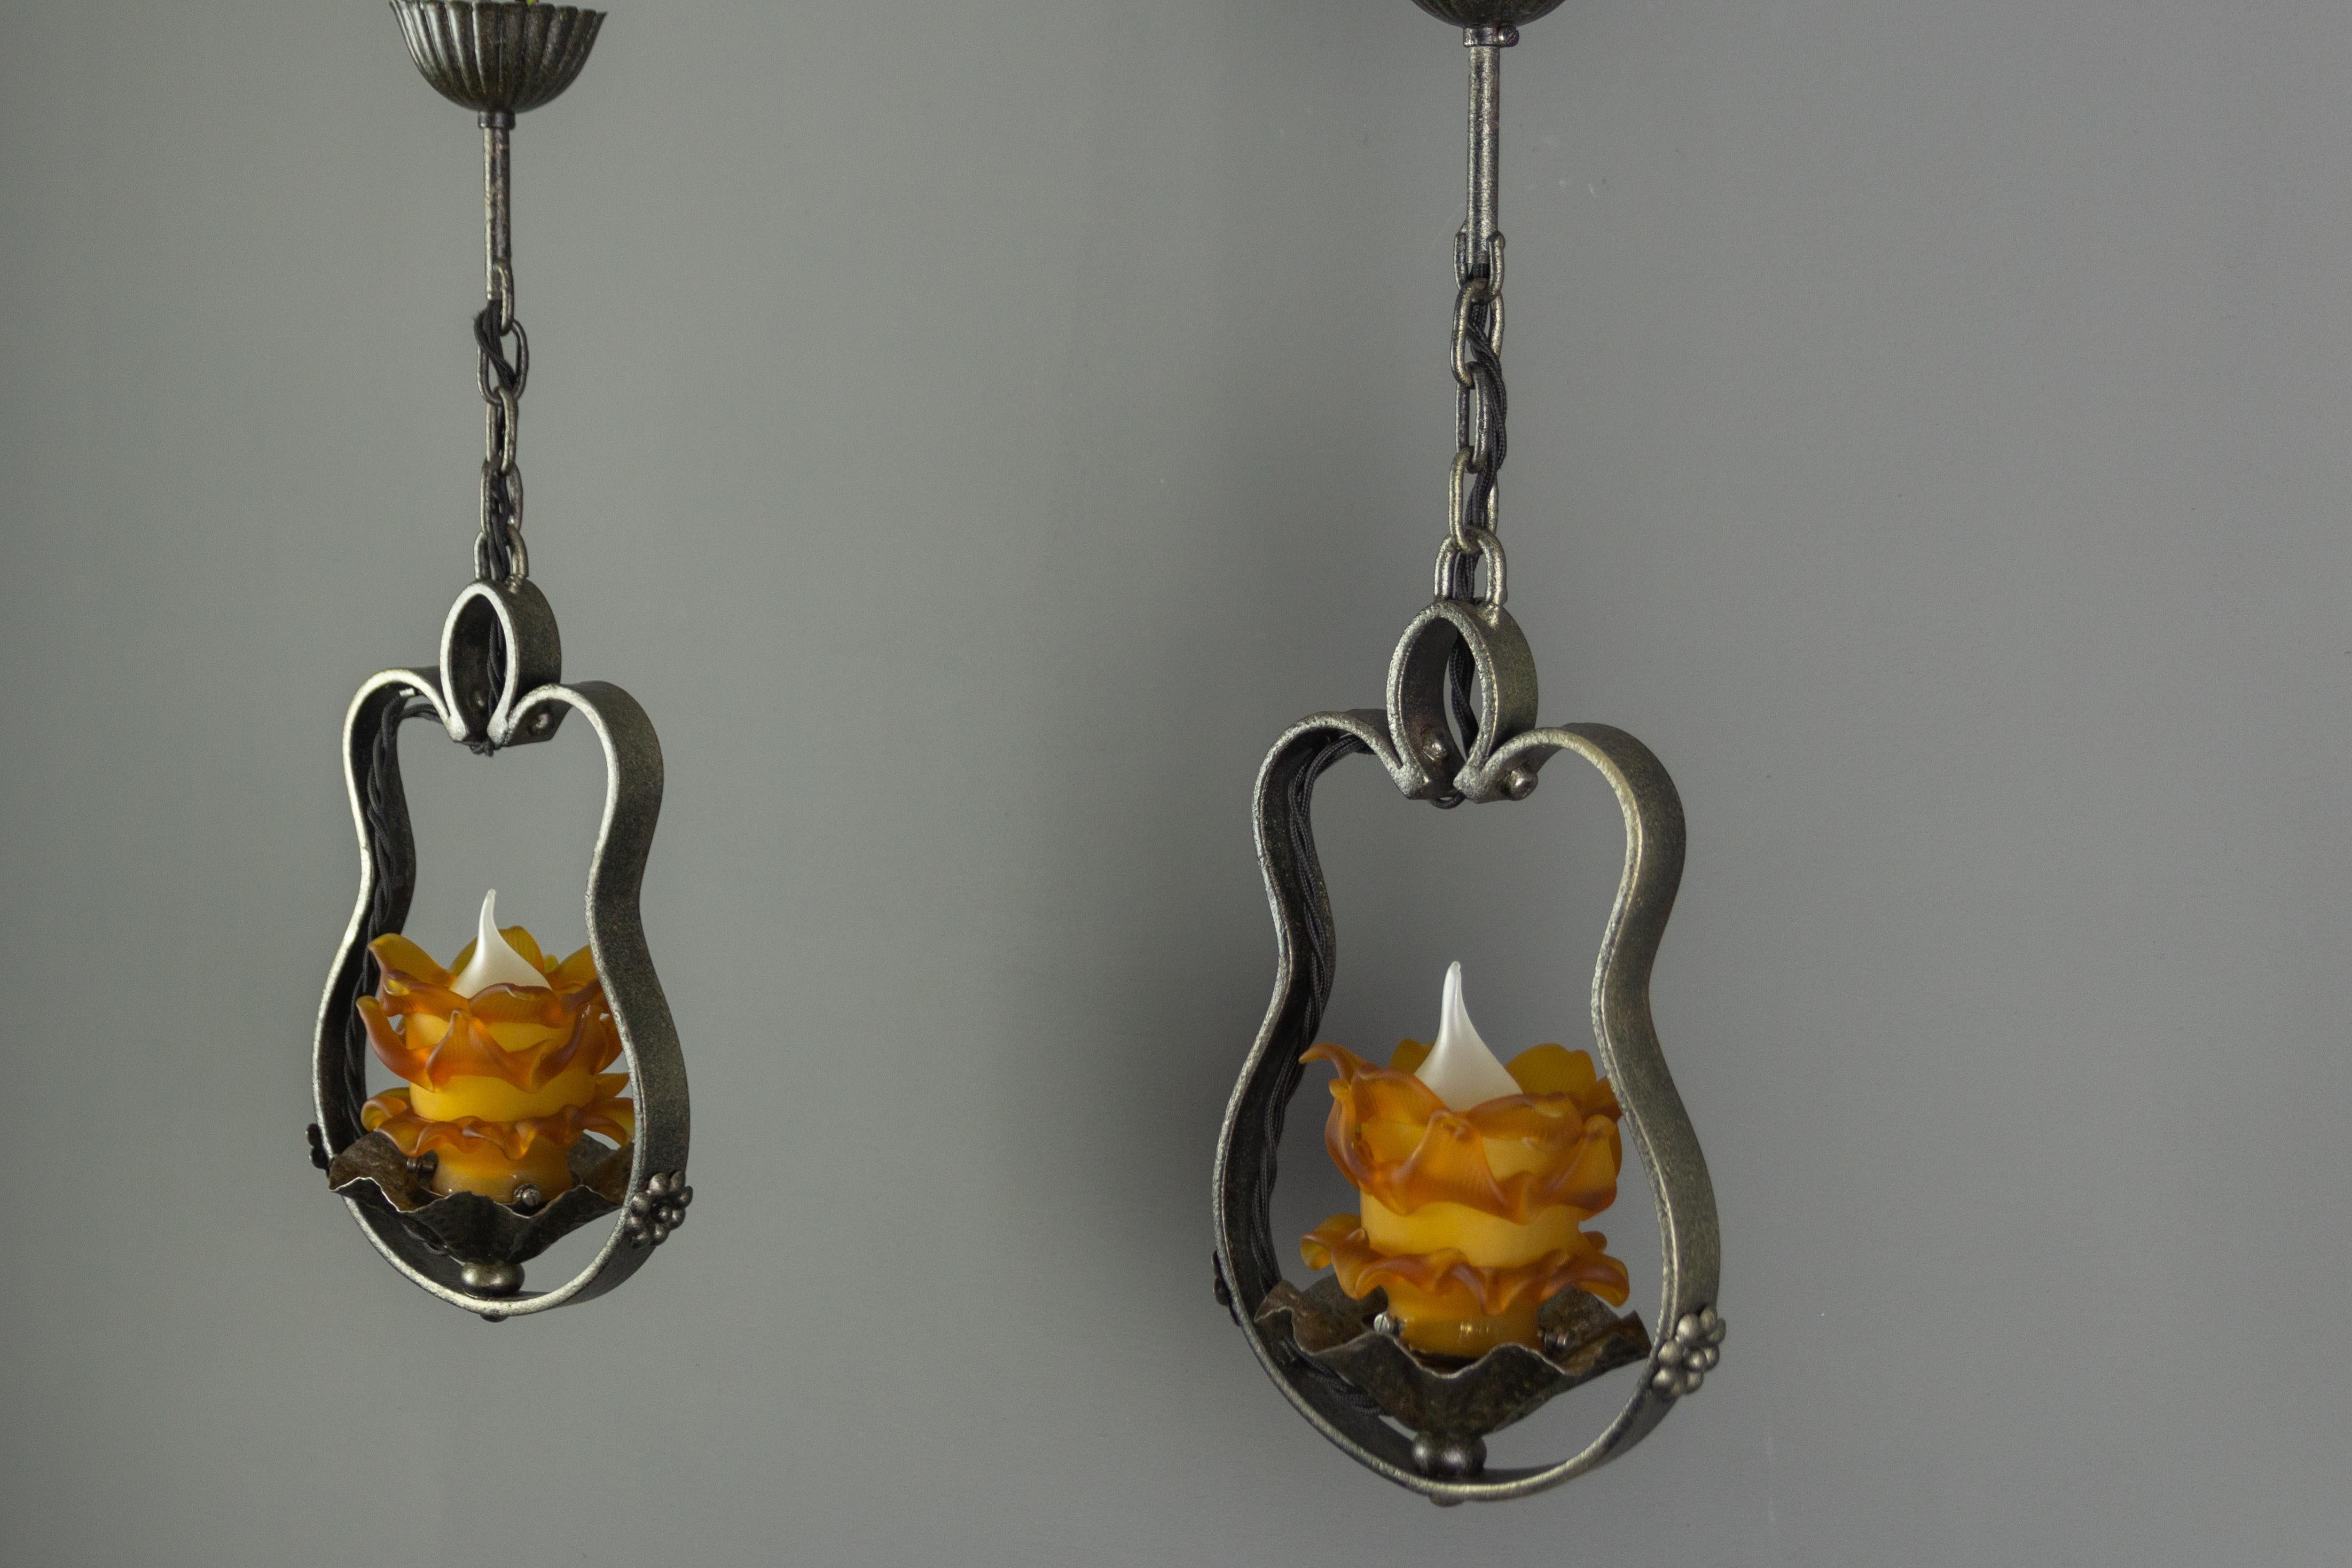 Pair of French Wrought Iron and Orange Glass Flower Shaped Pendant Lights 2